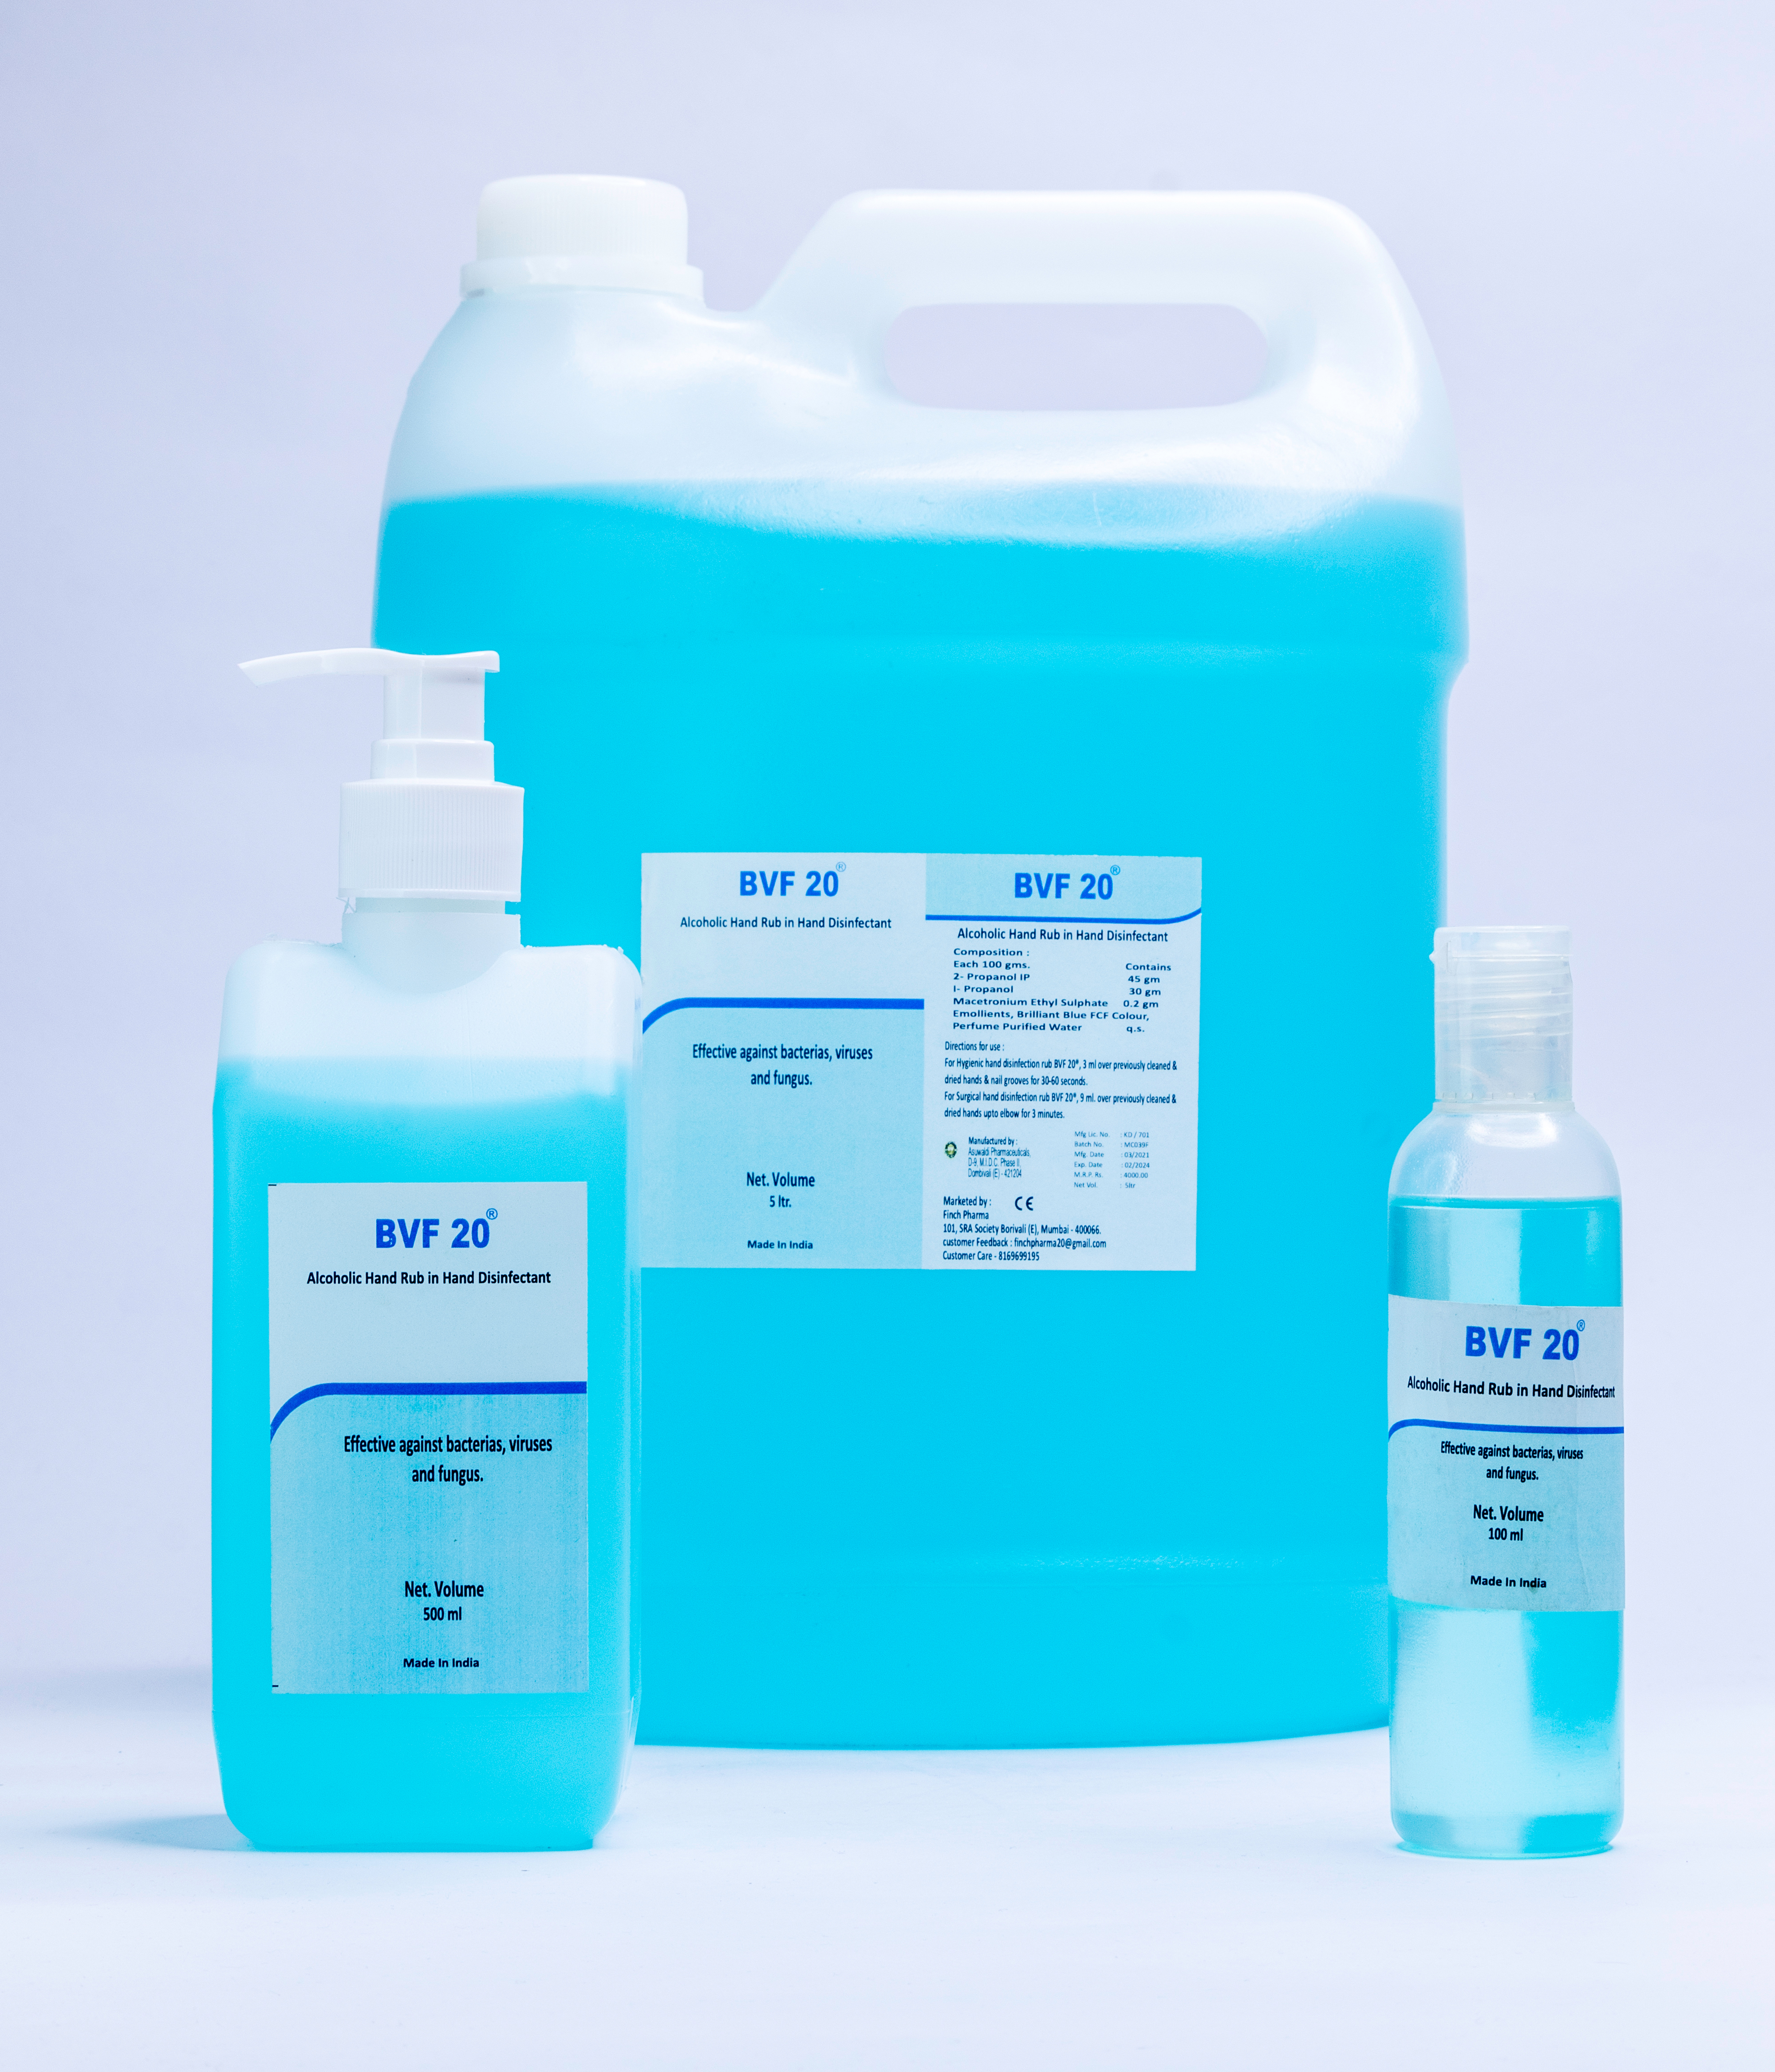 BVF 20 - Alcoholic Hand Rub in Hand Disinfectant